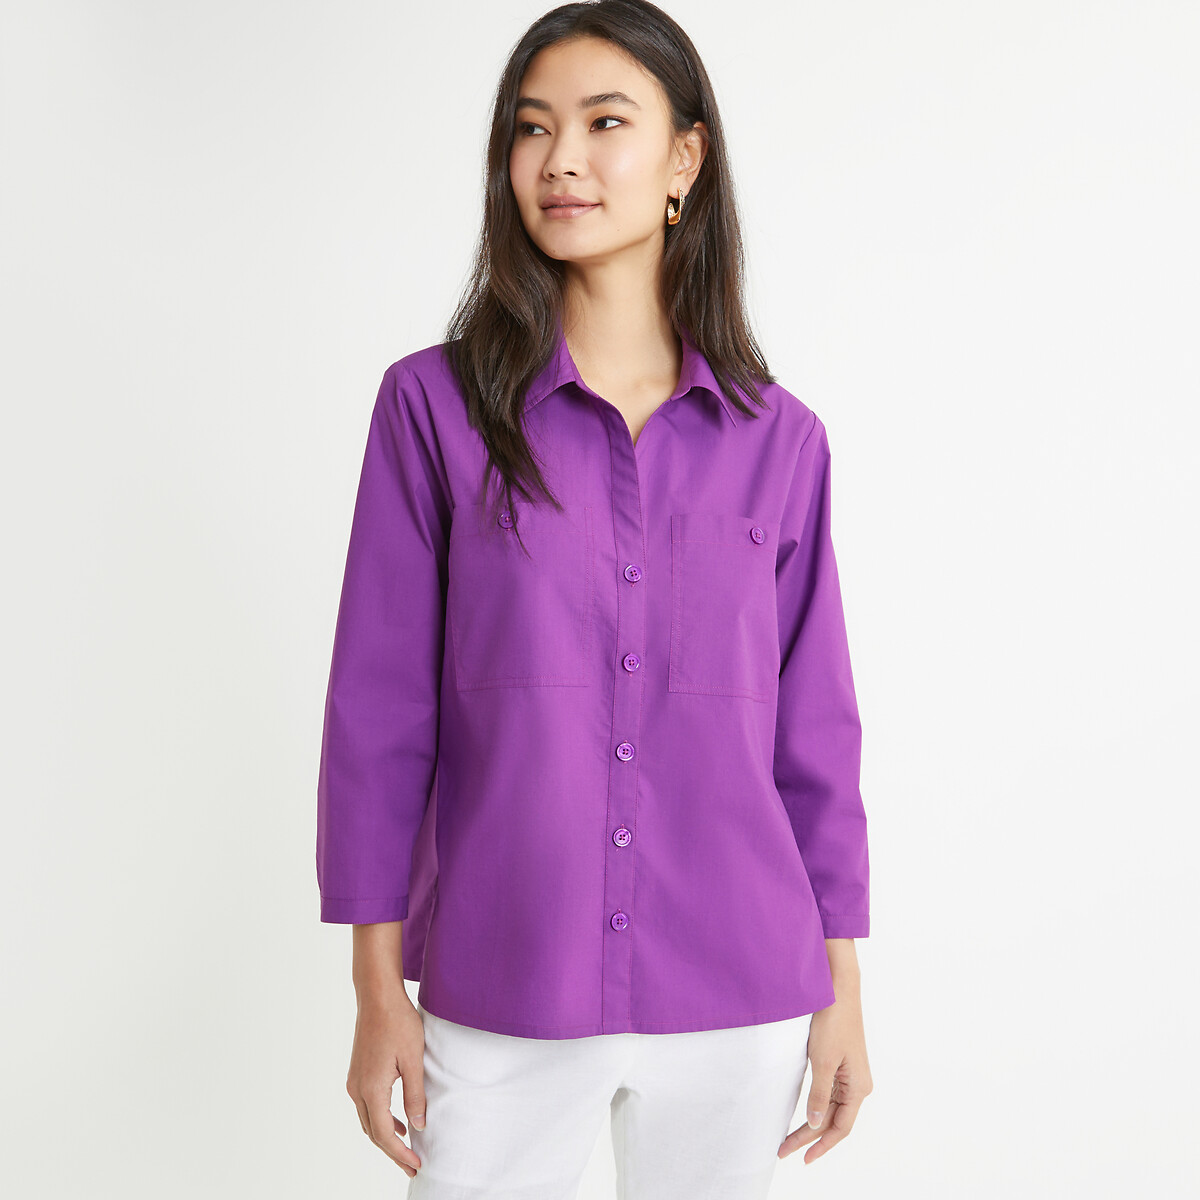 Cotton Shirt with 3/4 Length Sleeves